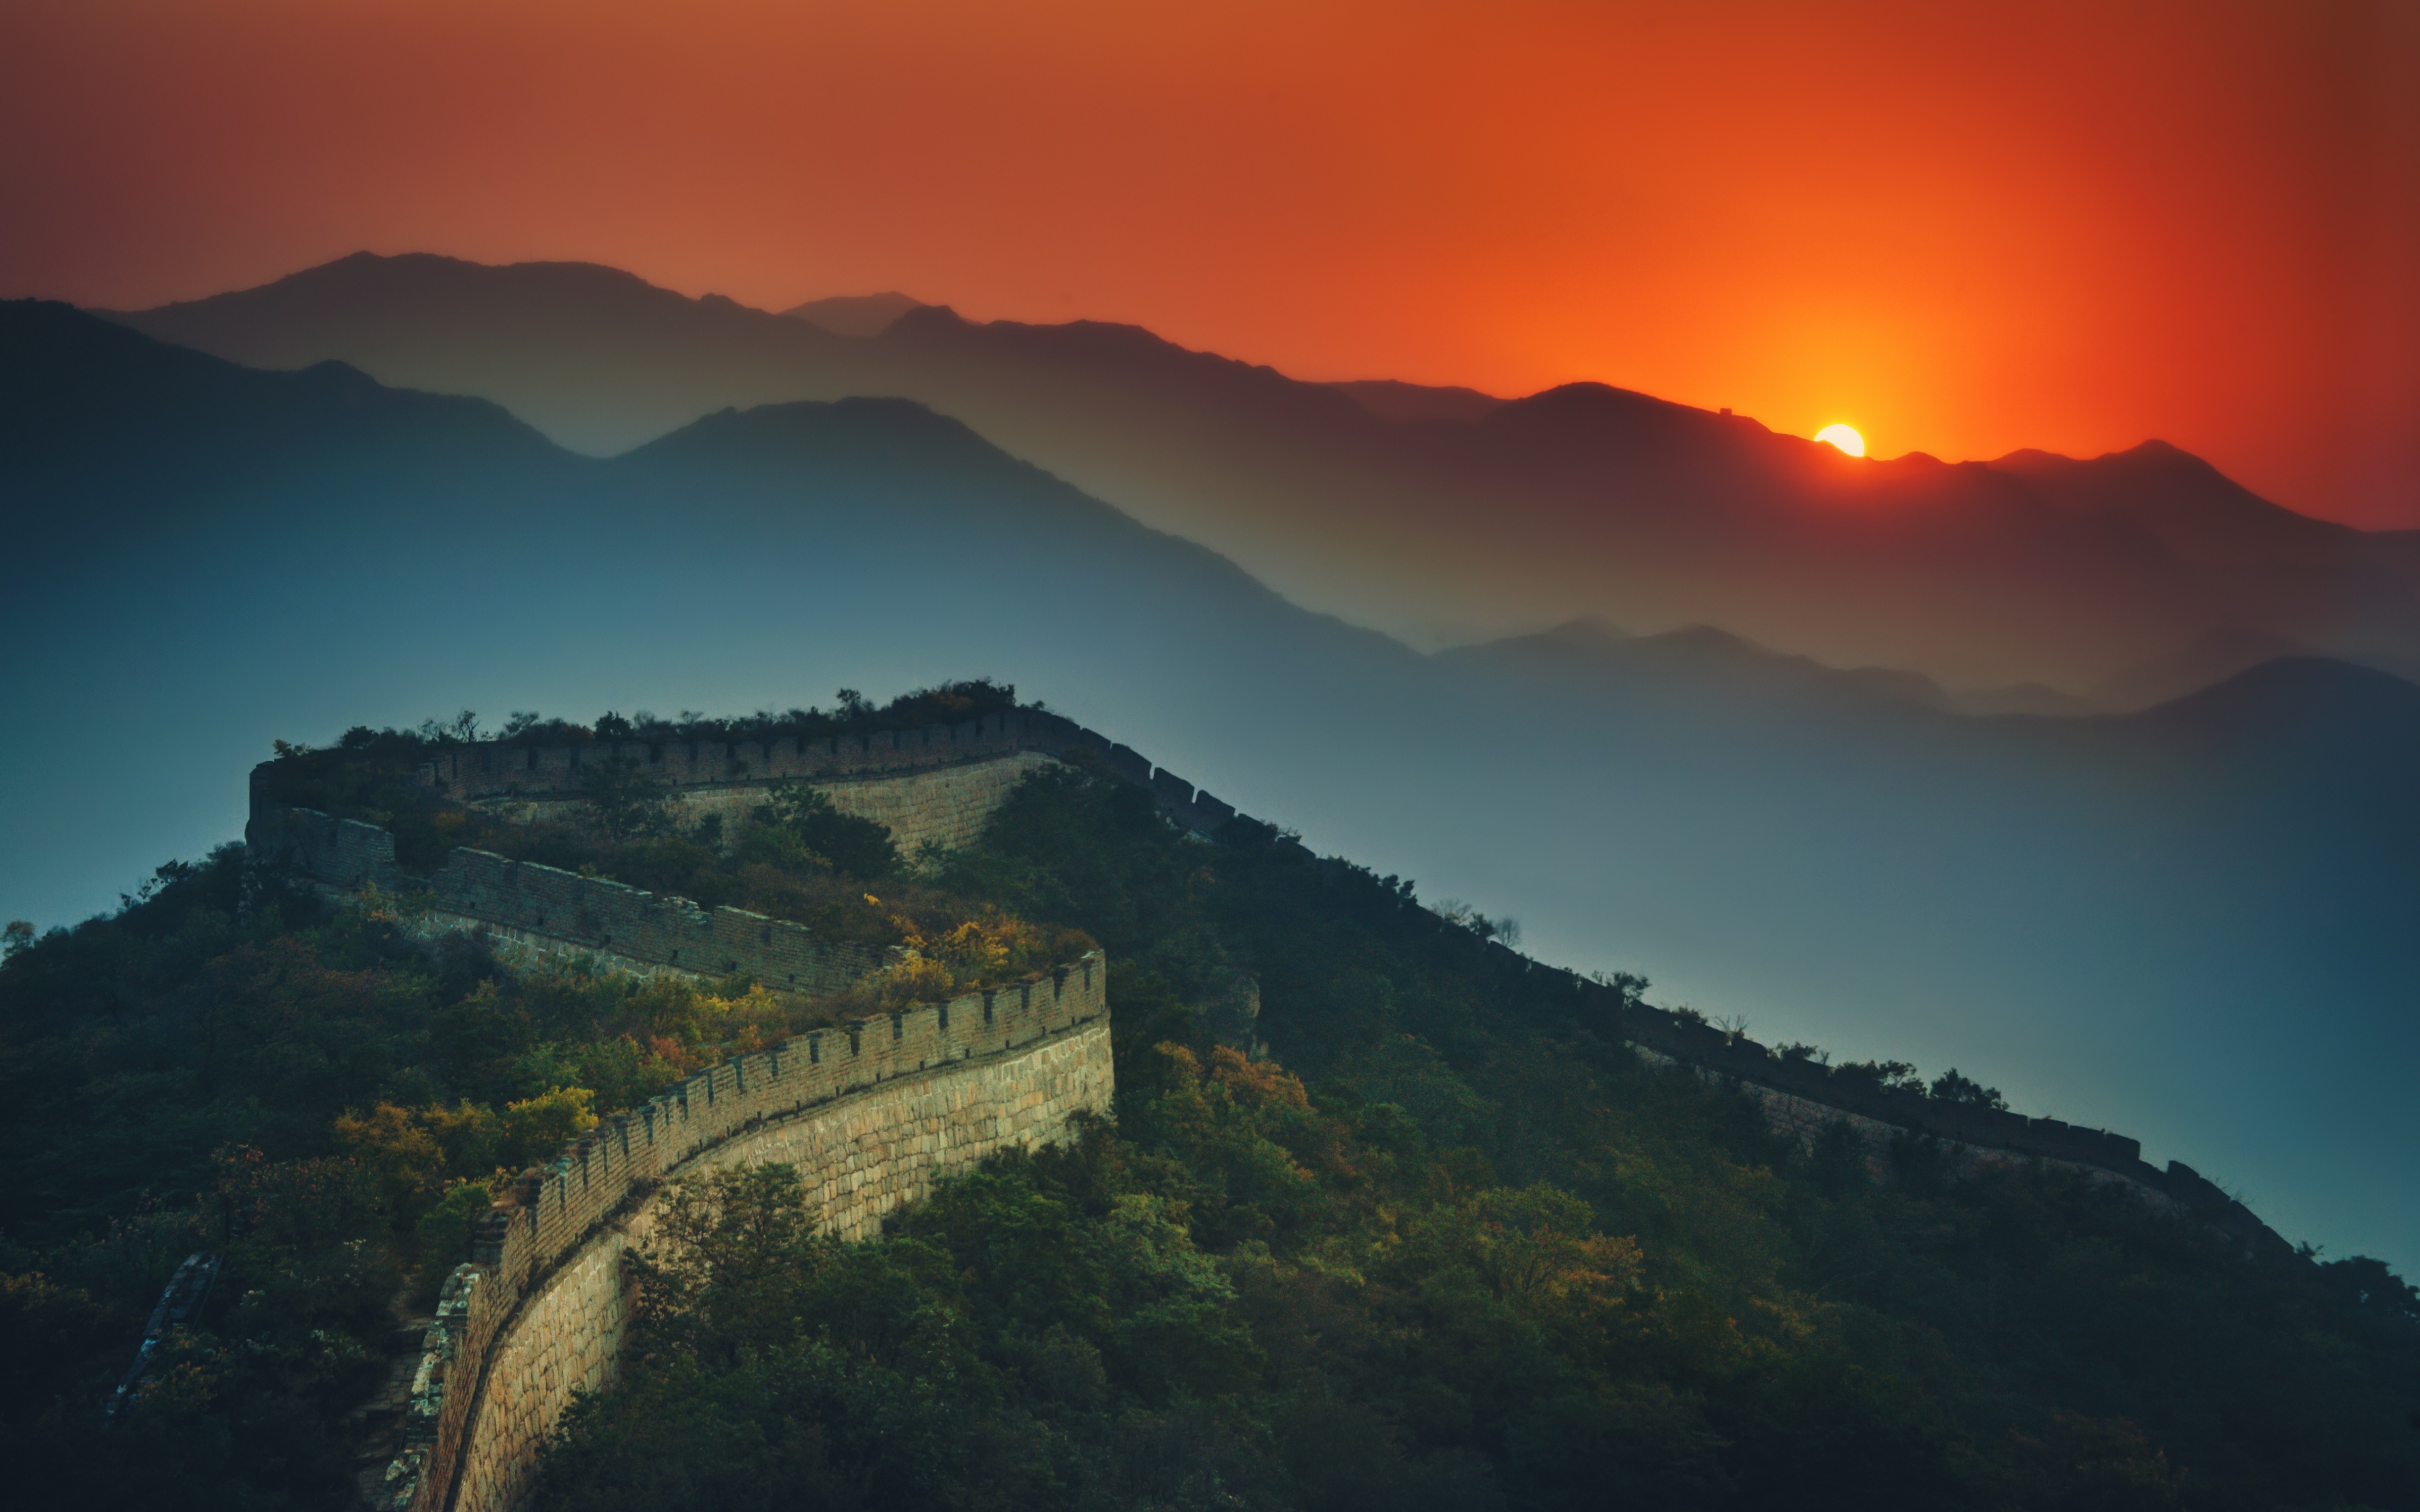 sunset, man made, great wall of china, china, monuments cellphone